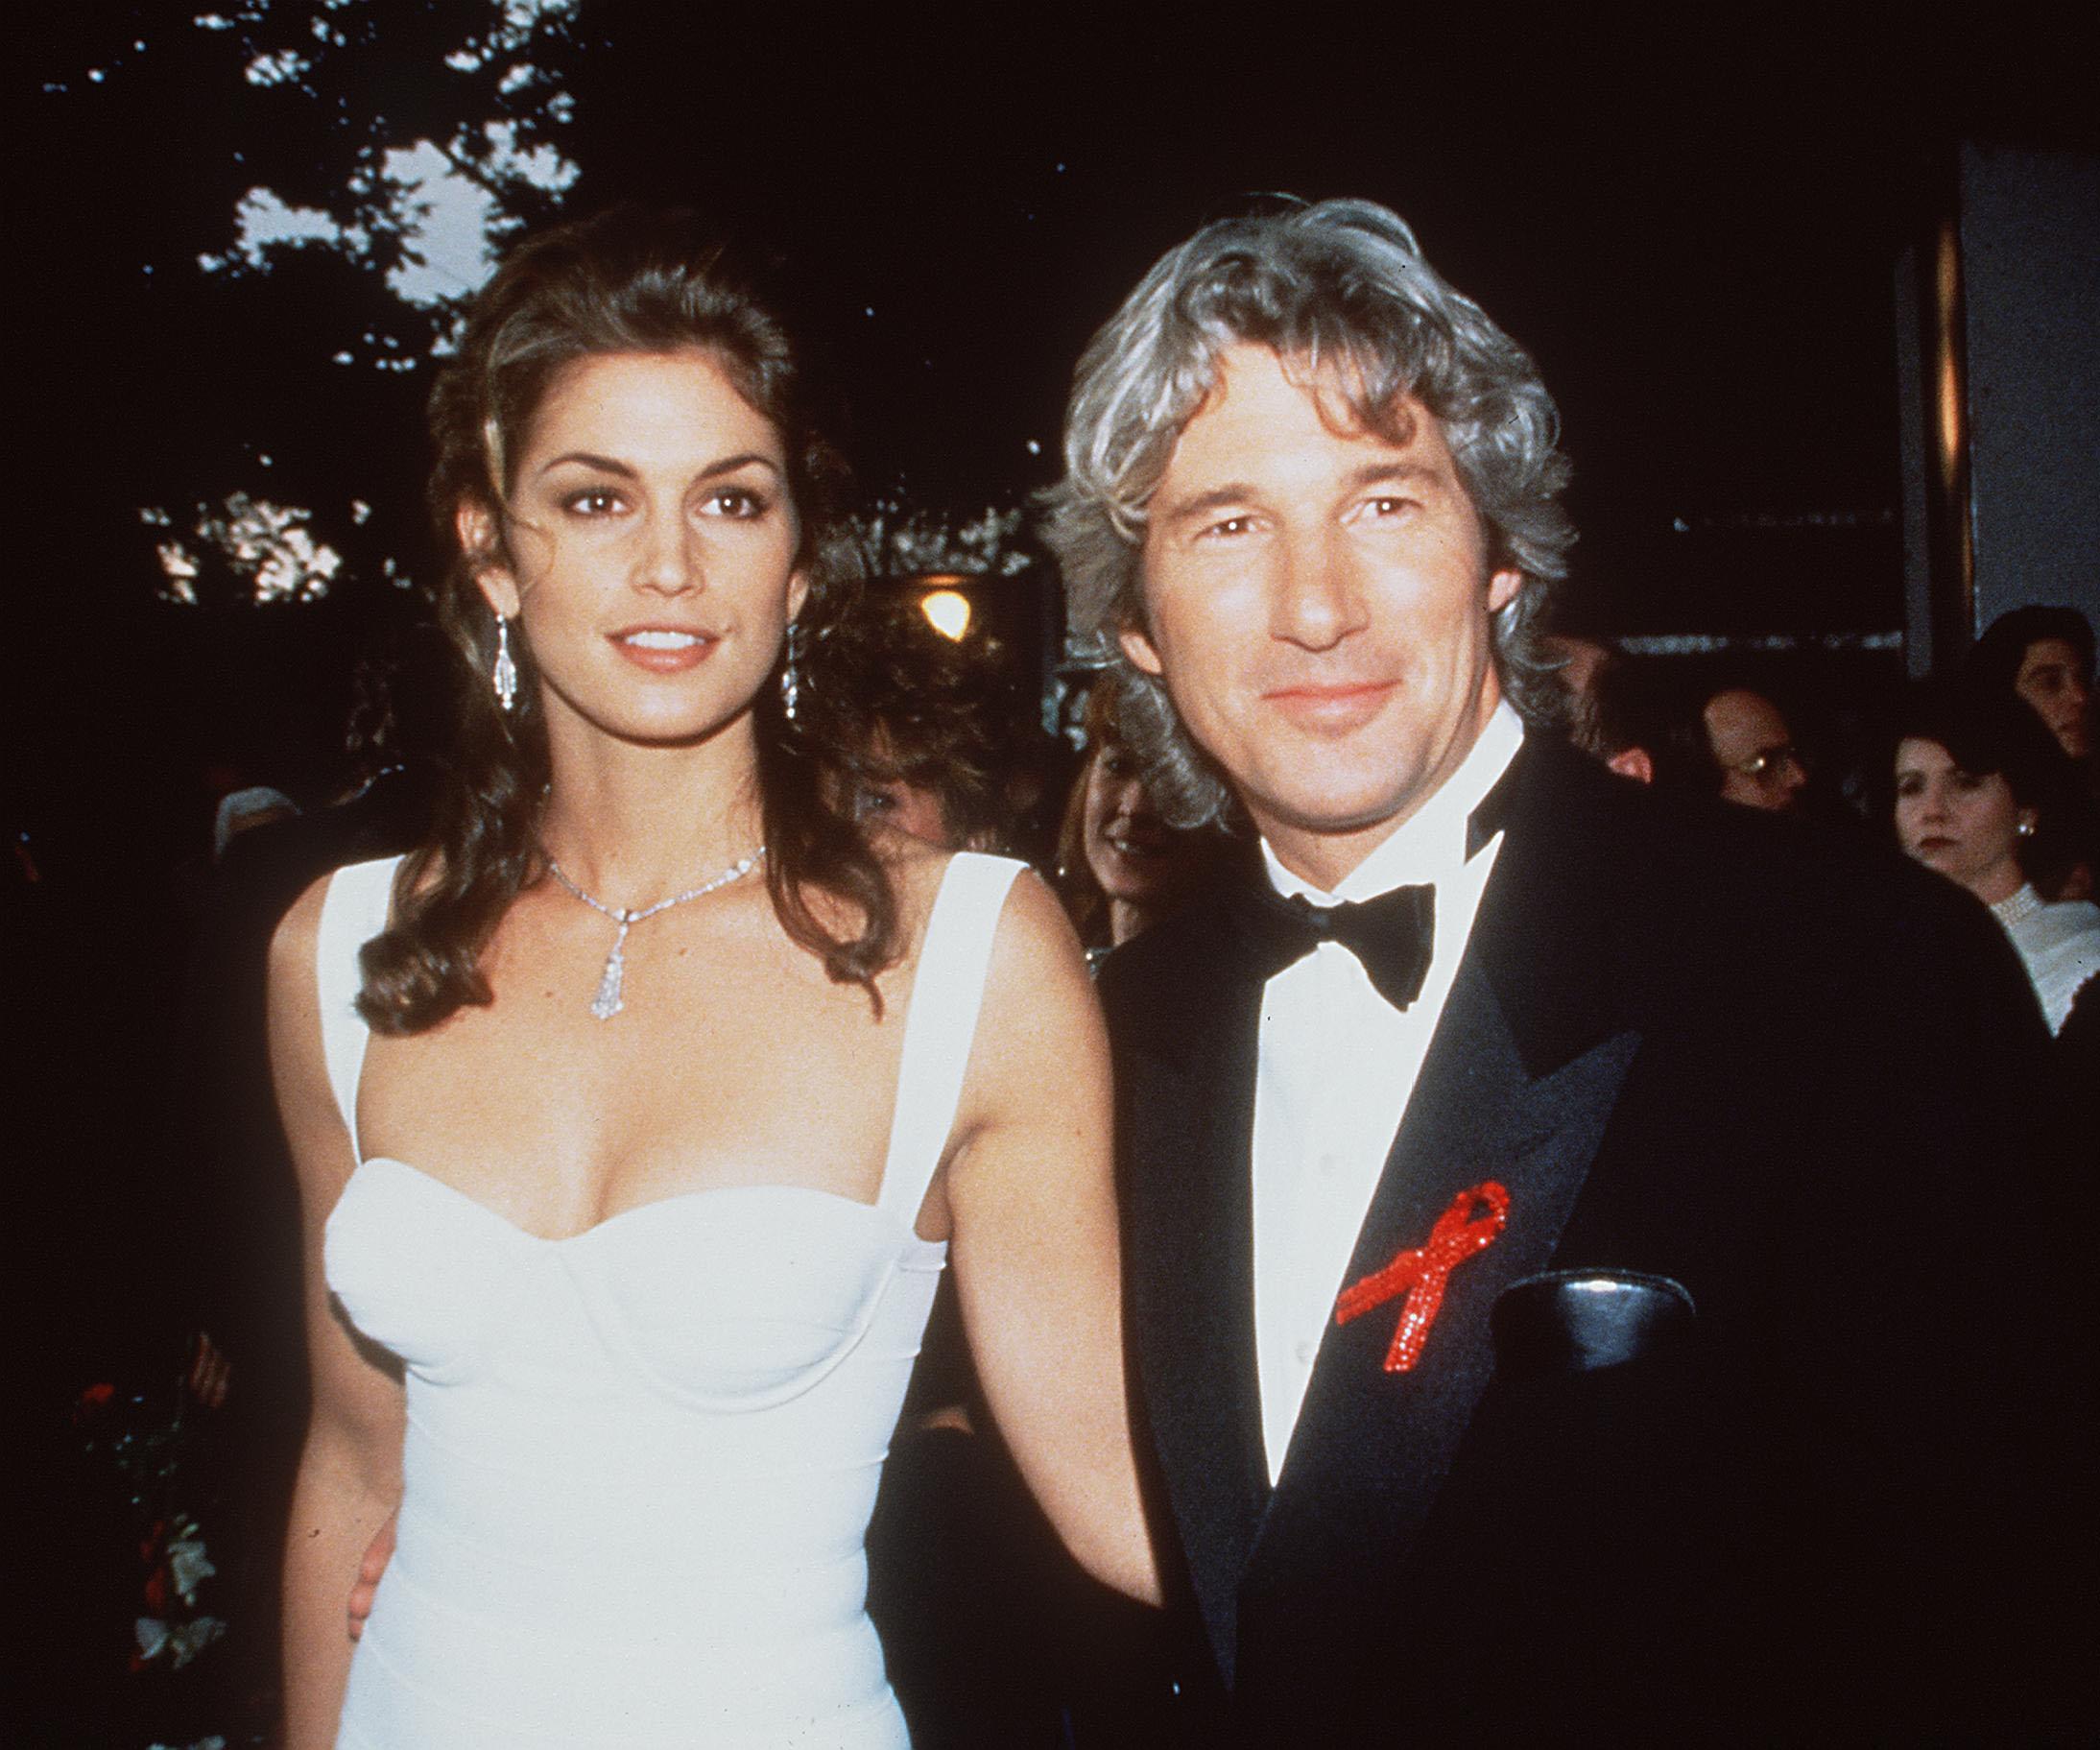 Cindy Crawford opens up about failed marriage to Richard Gere